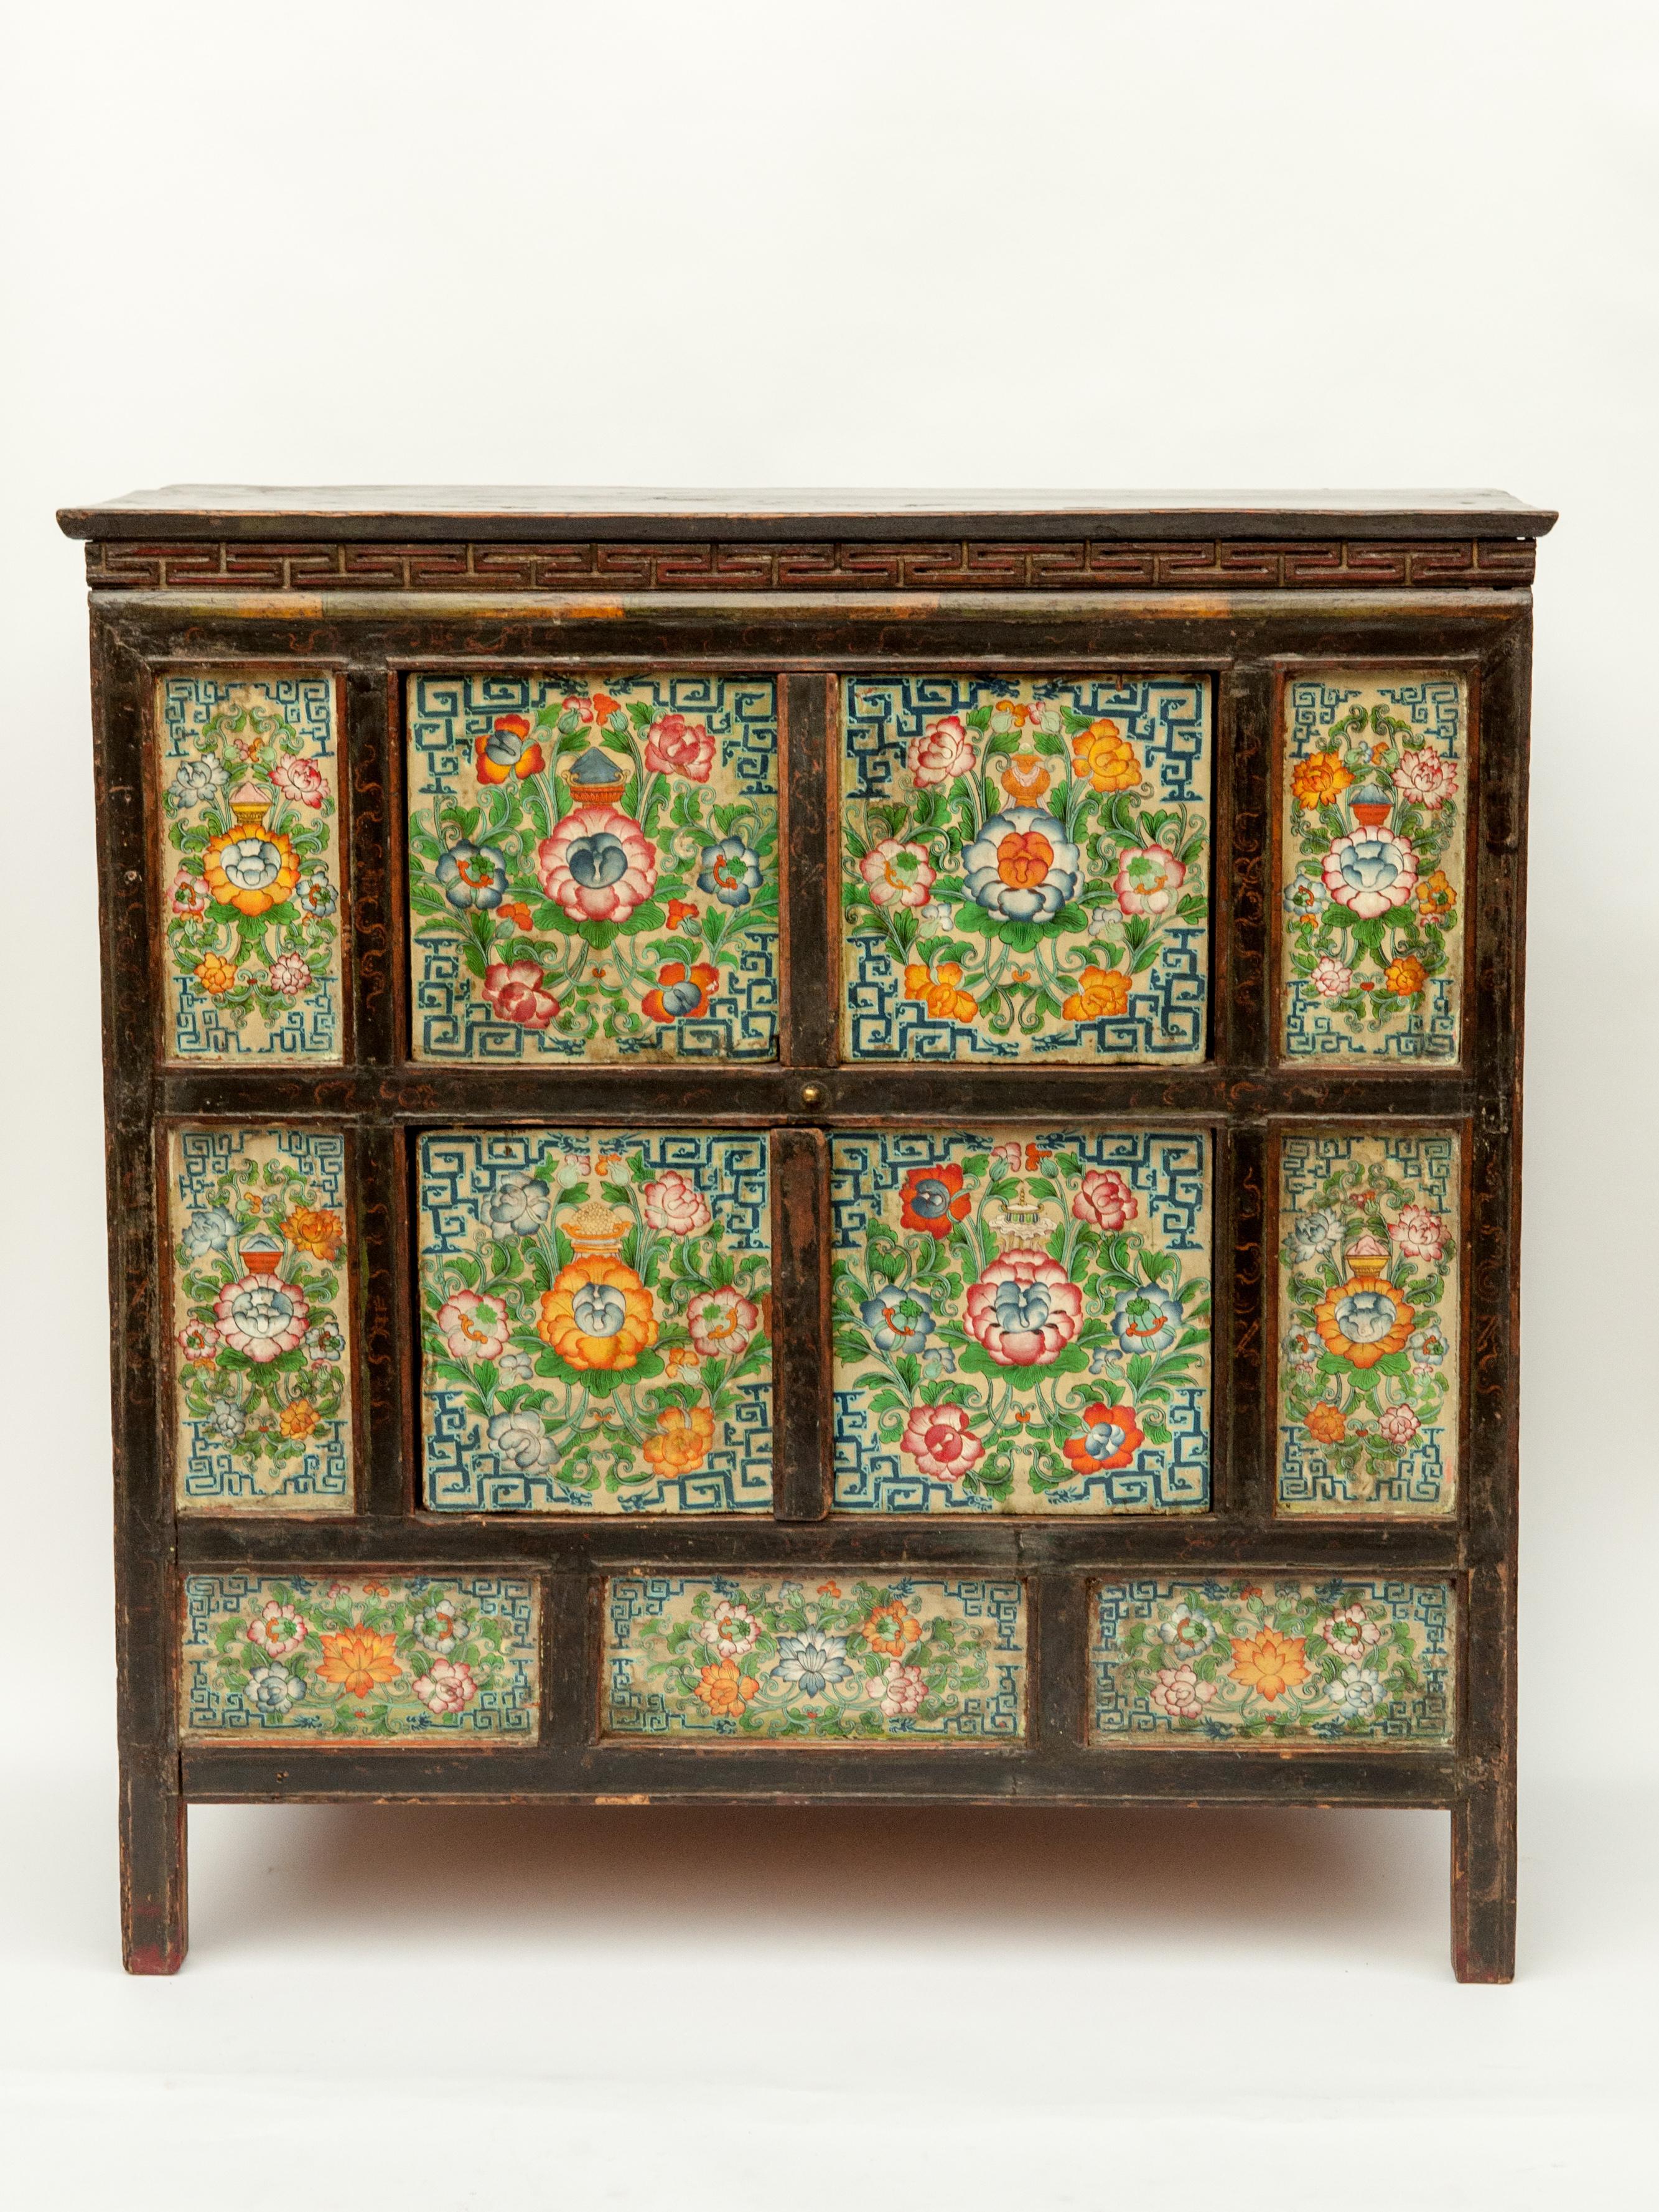 Antique 19th century hand painted Tibetan cabinet. Measures: 37 inches wide by 28 inches tall.
Floral motifs and auspicious symbols predominate in this small Tibetan cabinet, distinguished by its quality of painting, and the vibrancy of its colors.